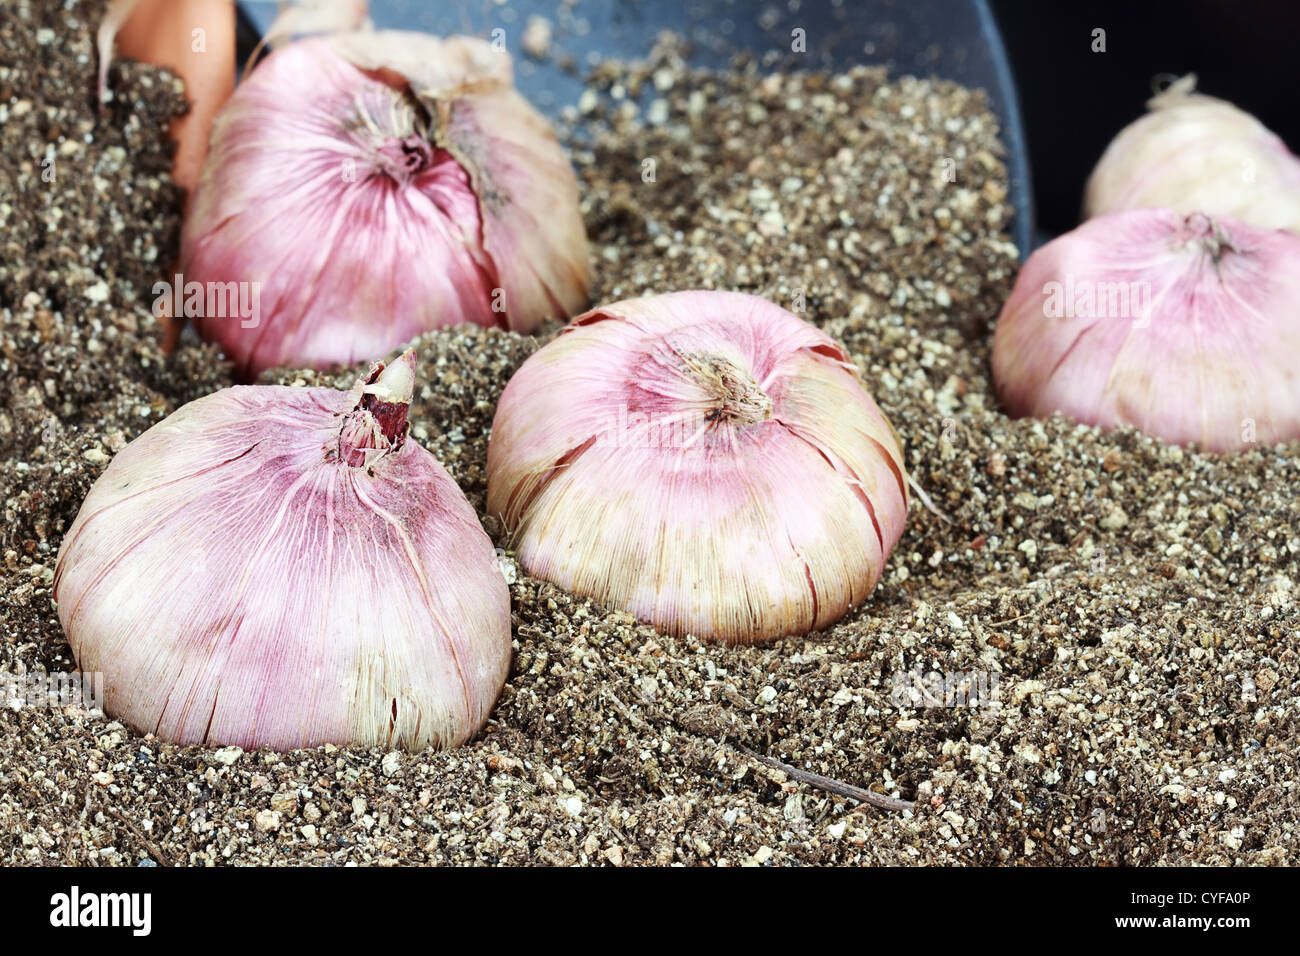 Flower corms or bulbs in potting soil with trowel. Stock Photo